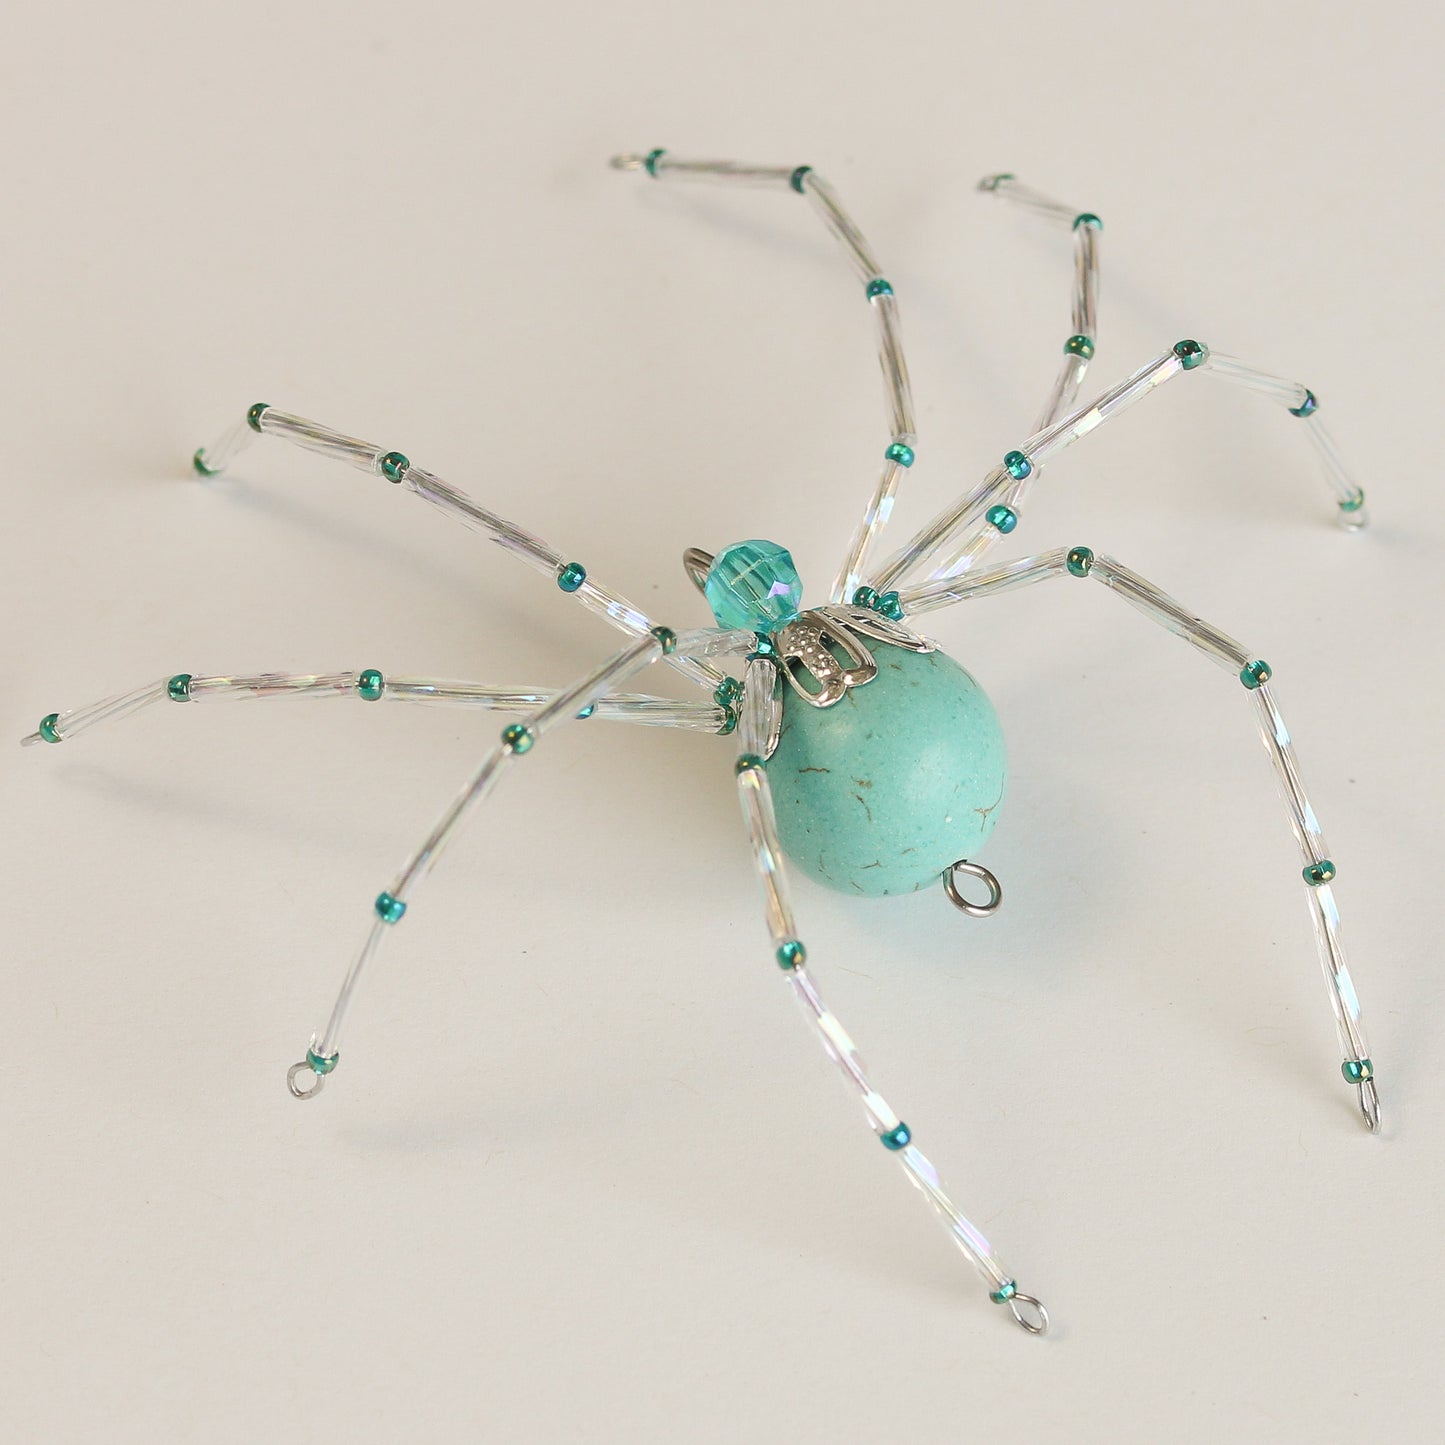 Beaded Spider Christmas Ornaments Set of 3 (CUSTOM FOR AMY P. - One of a Kind)